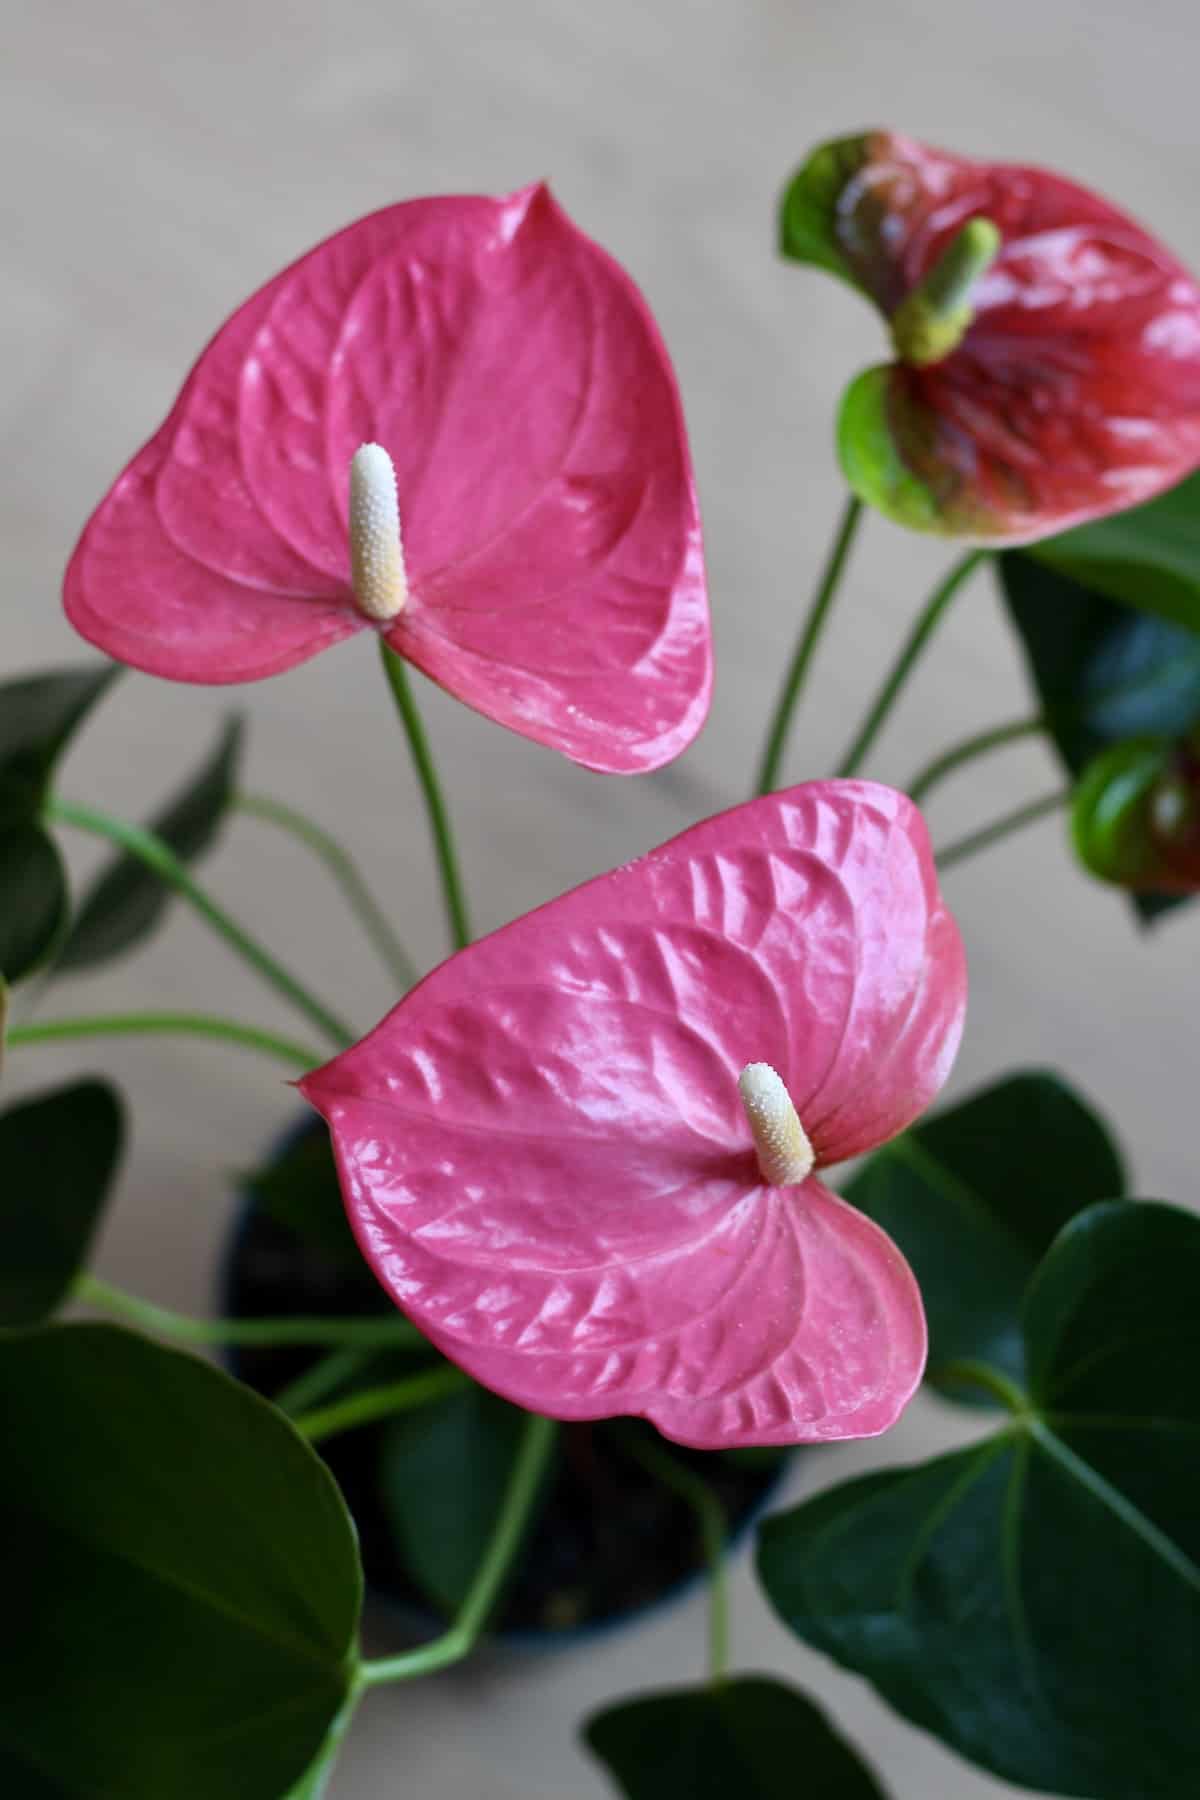 Anthurium - how to care for anthurium as a houseplant